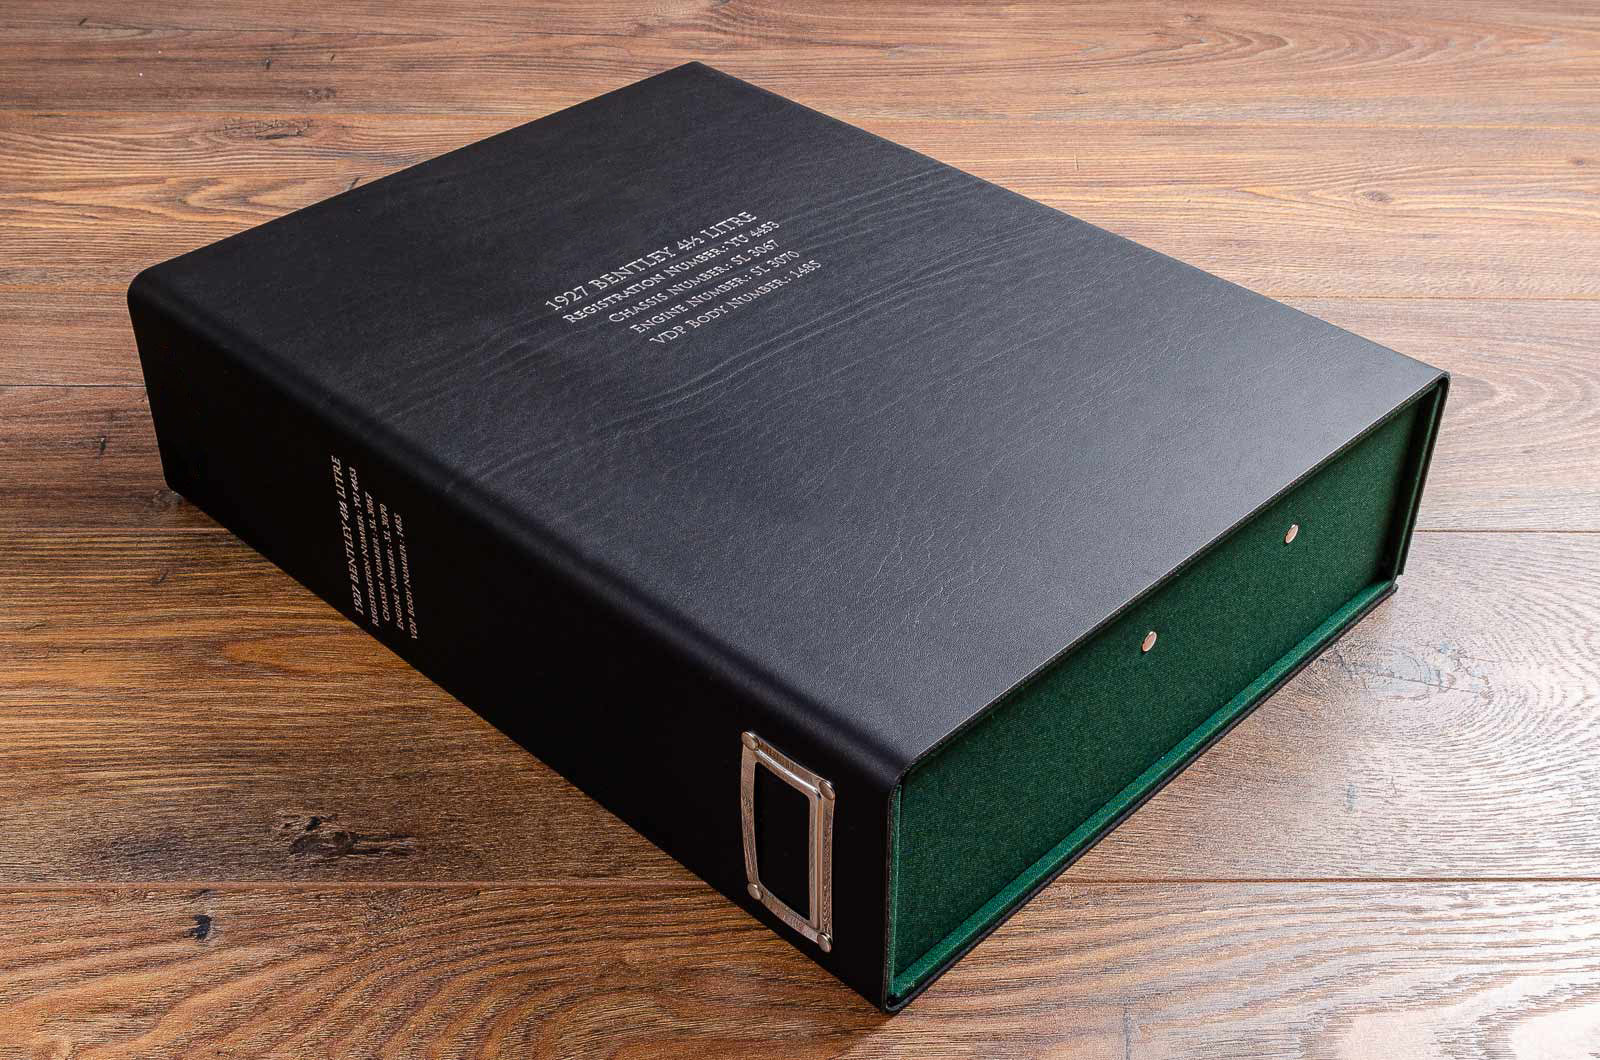 Customised black and green vehicle document box with silver foil embossment